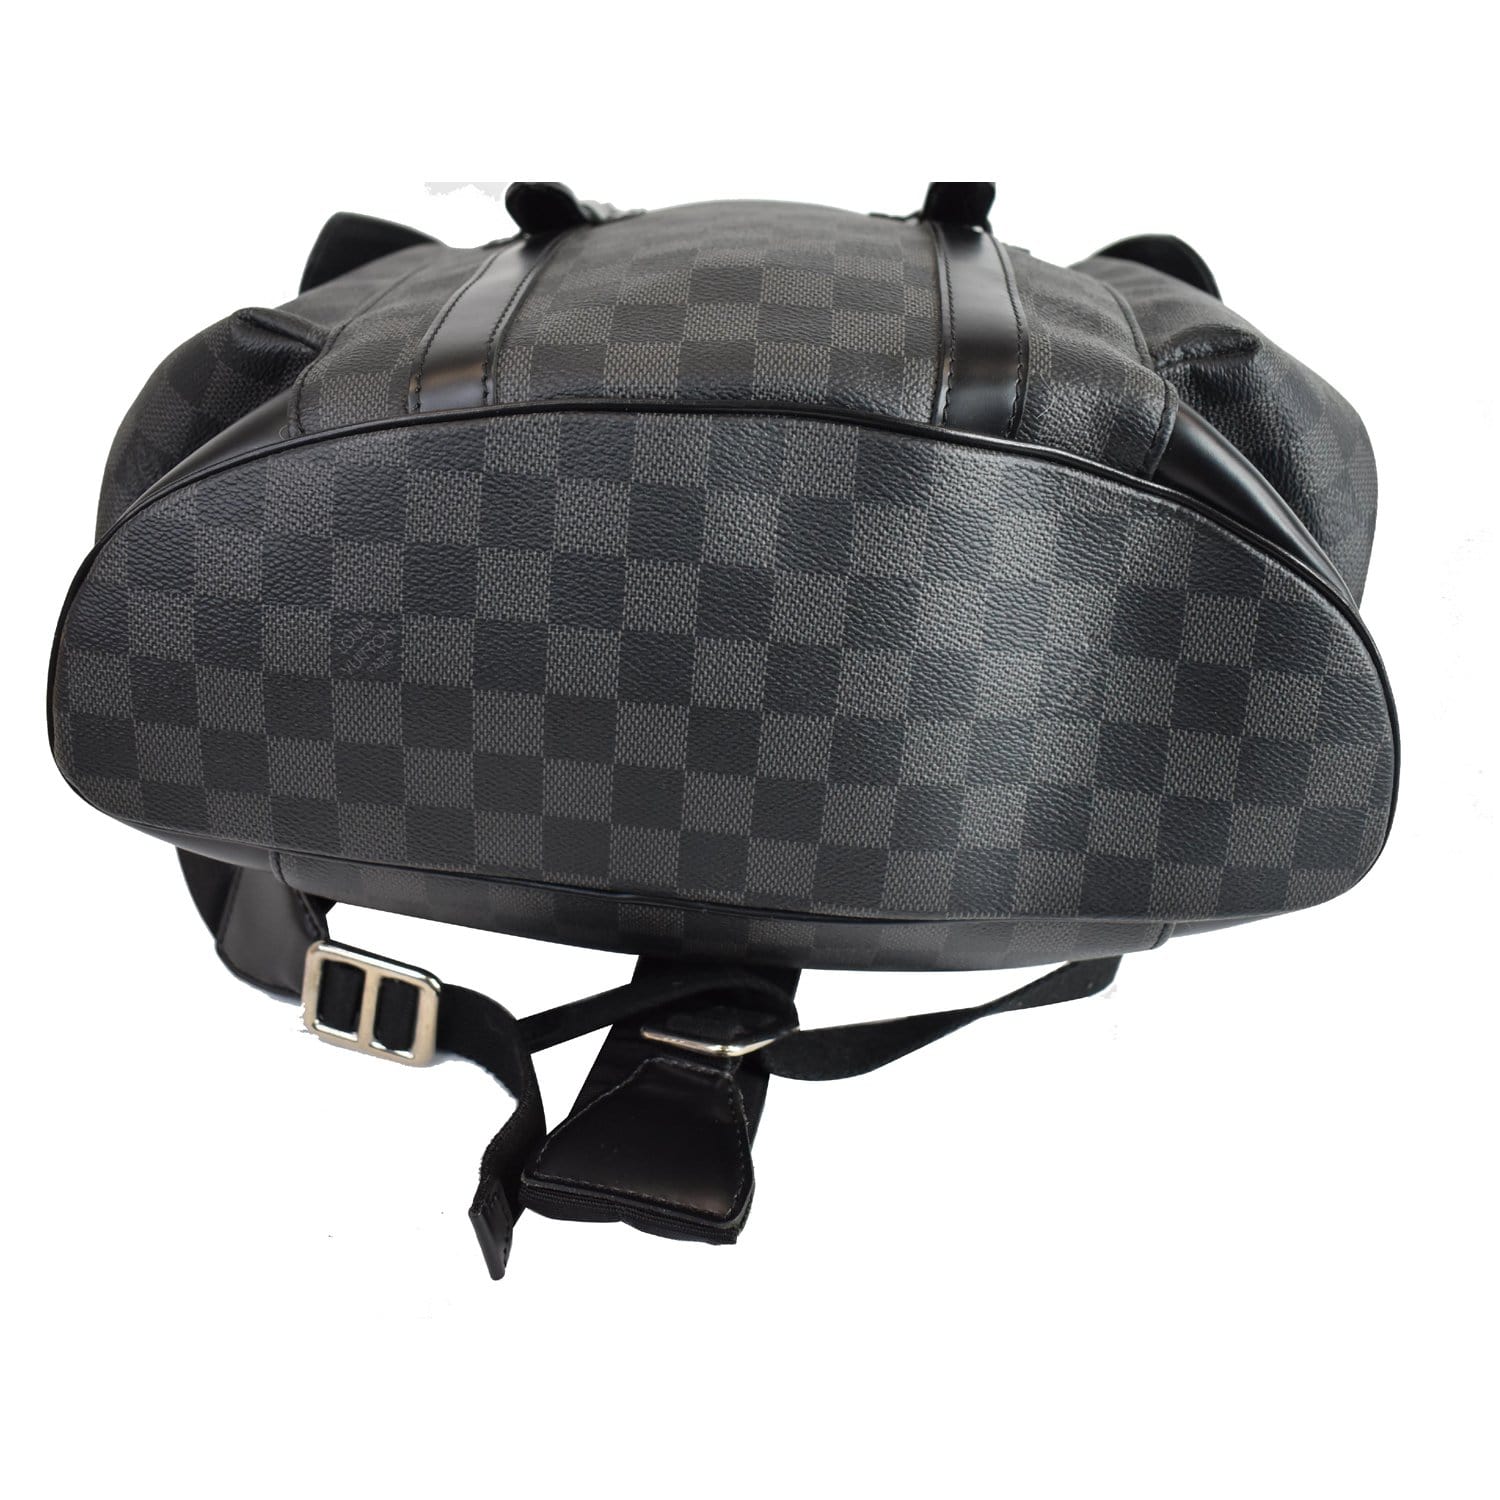 vuitton backpack christopher